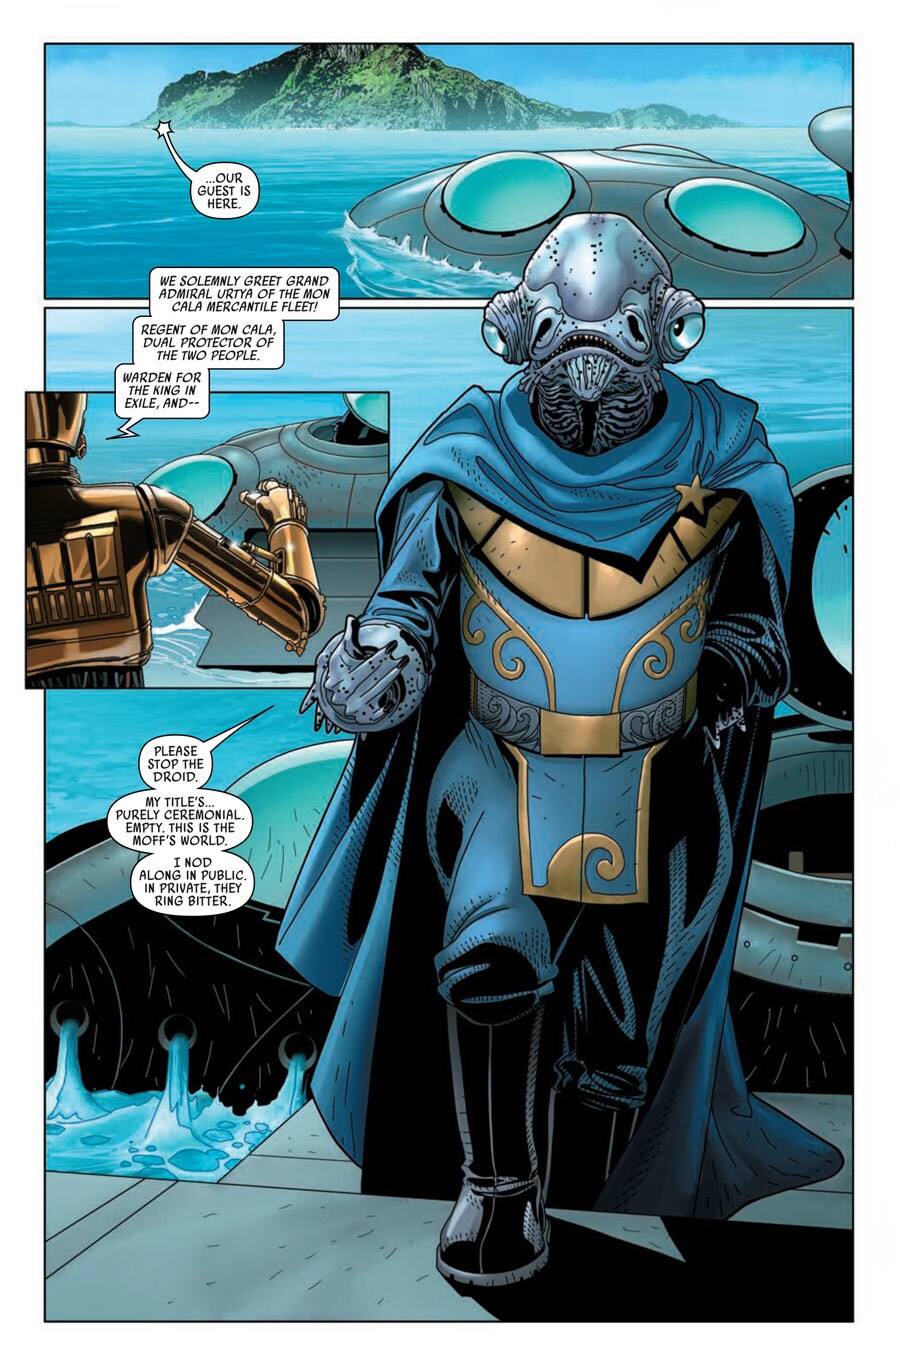 C-3PO greets Grand Admiral Uritya in a series of comic panels.